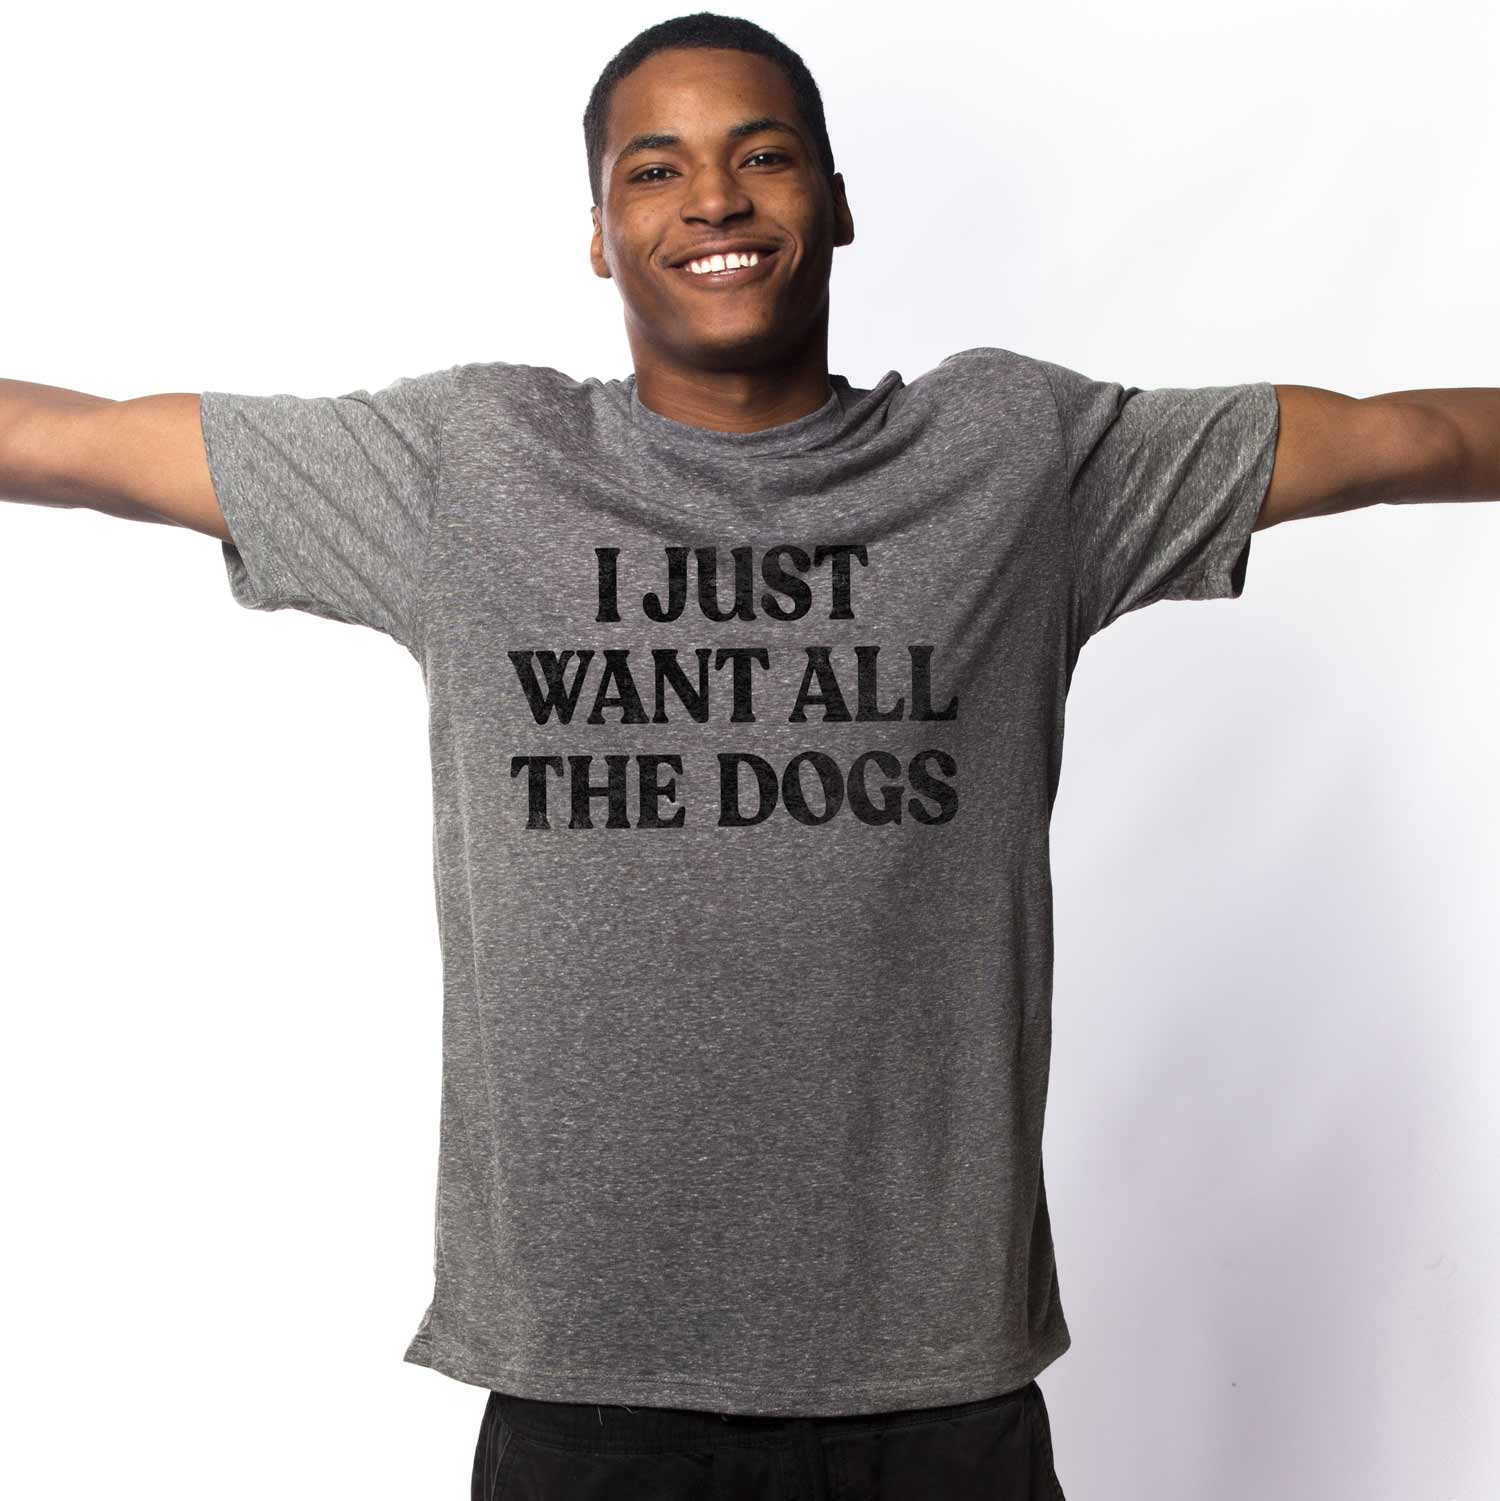 Men's Want All The Dogs Vintage Graphic Tee | Funny Animal Triblend T-shirt on Model | Solid Threads